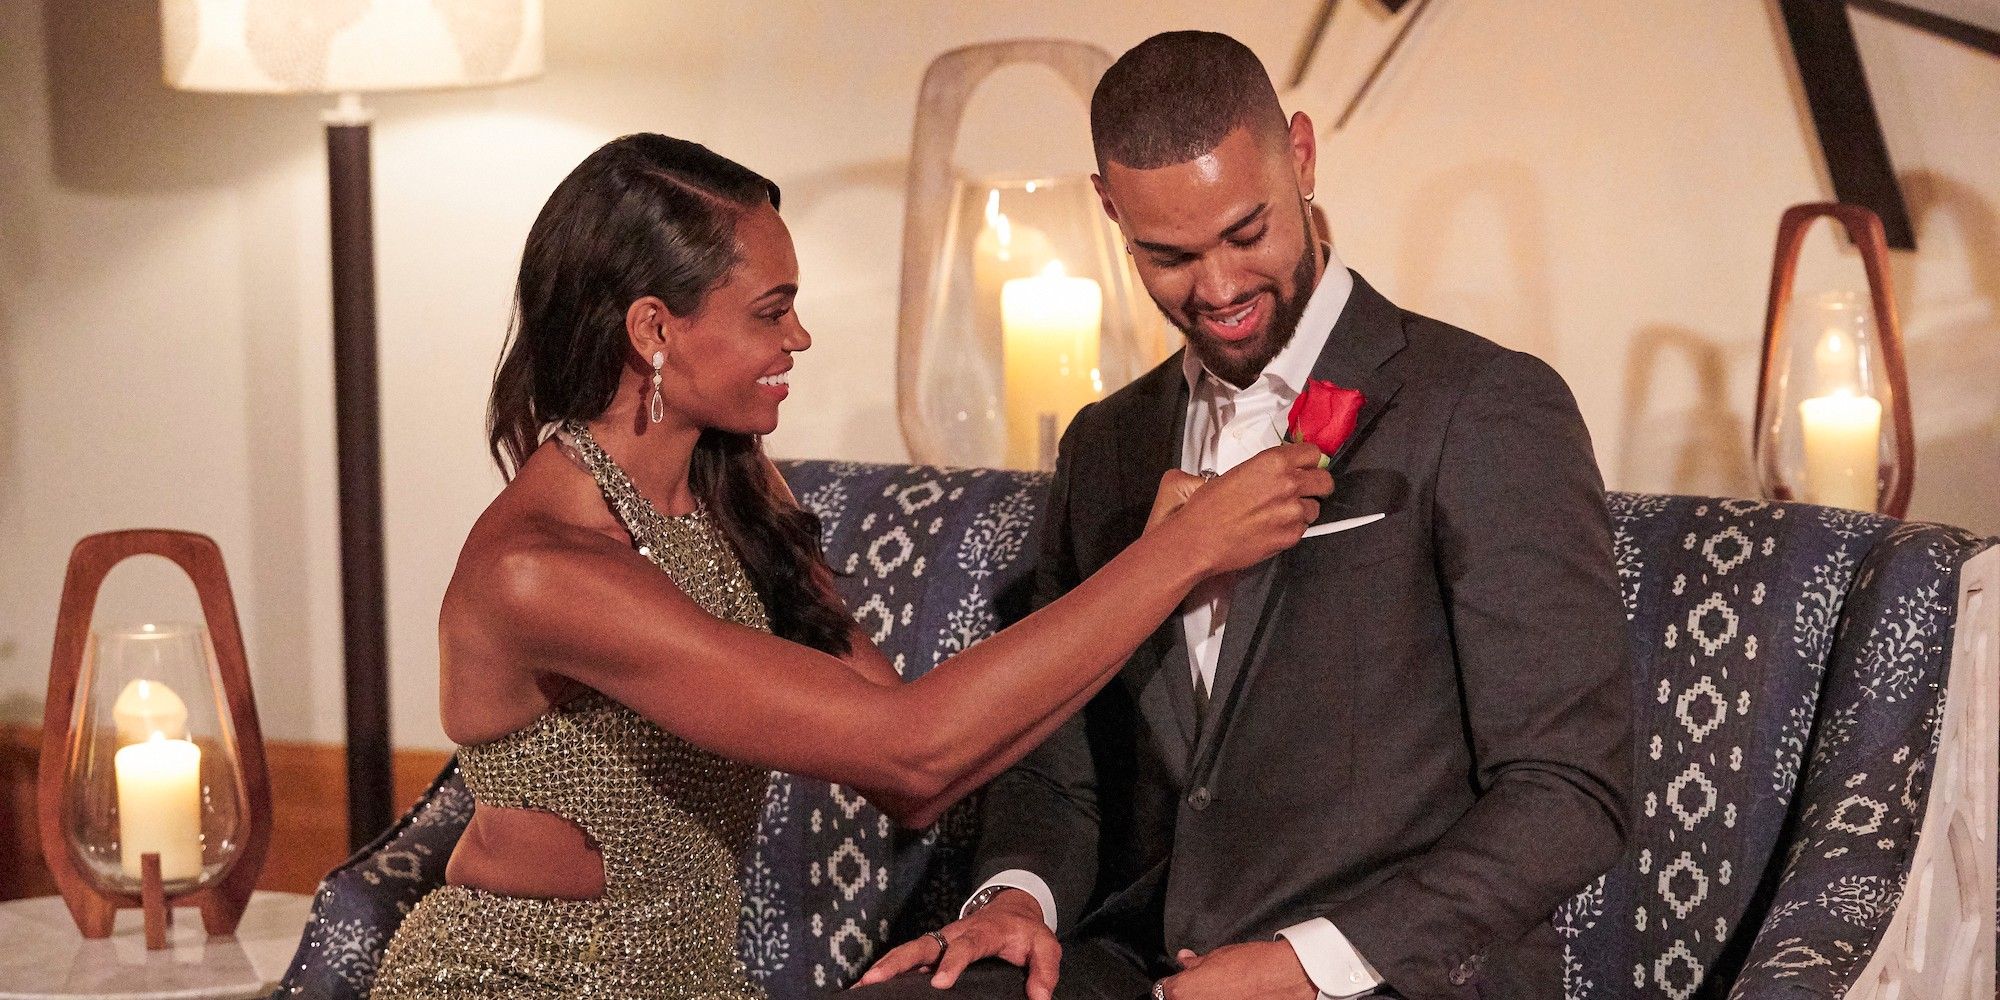 The Bachelorette season 18 Michelle Young puts a rose on Nayte